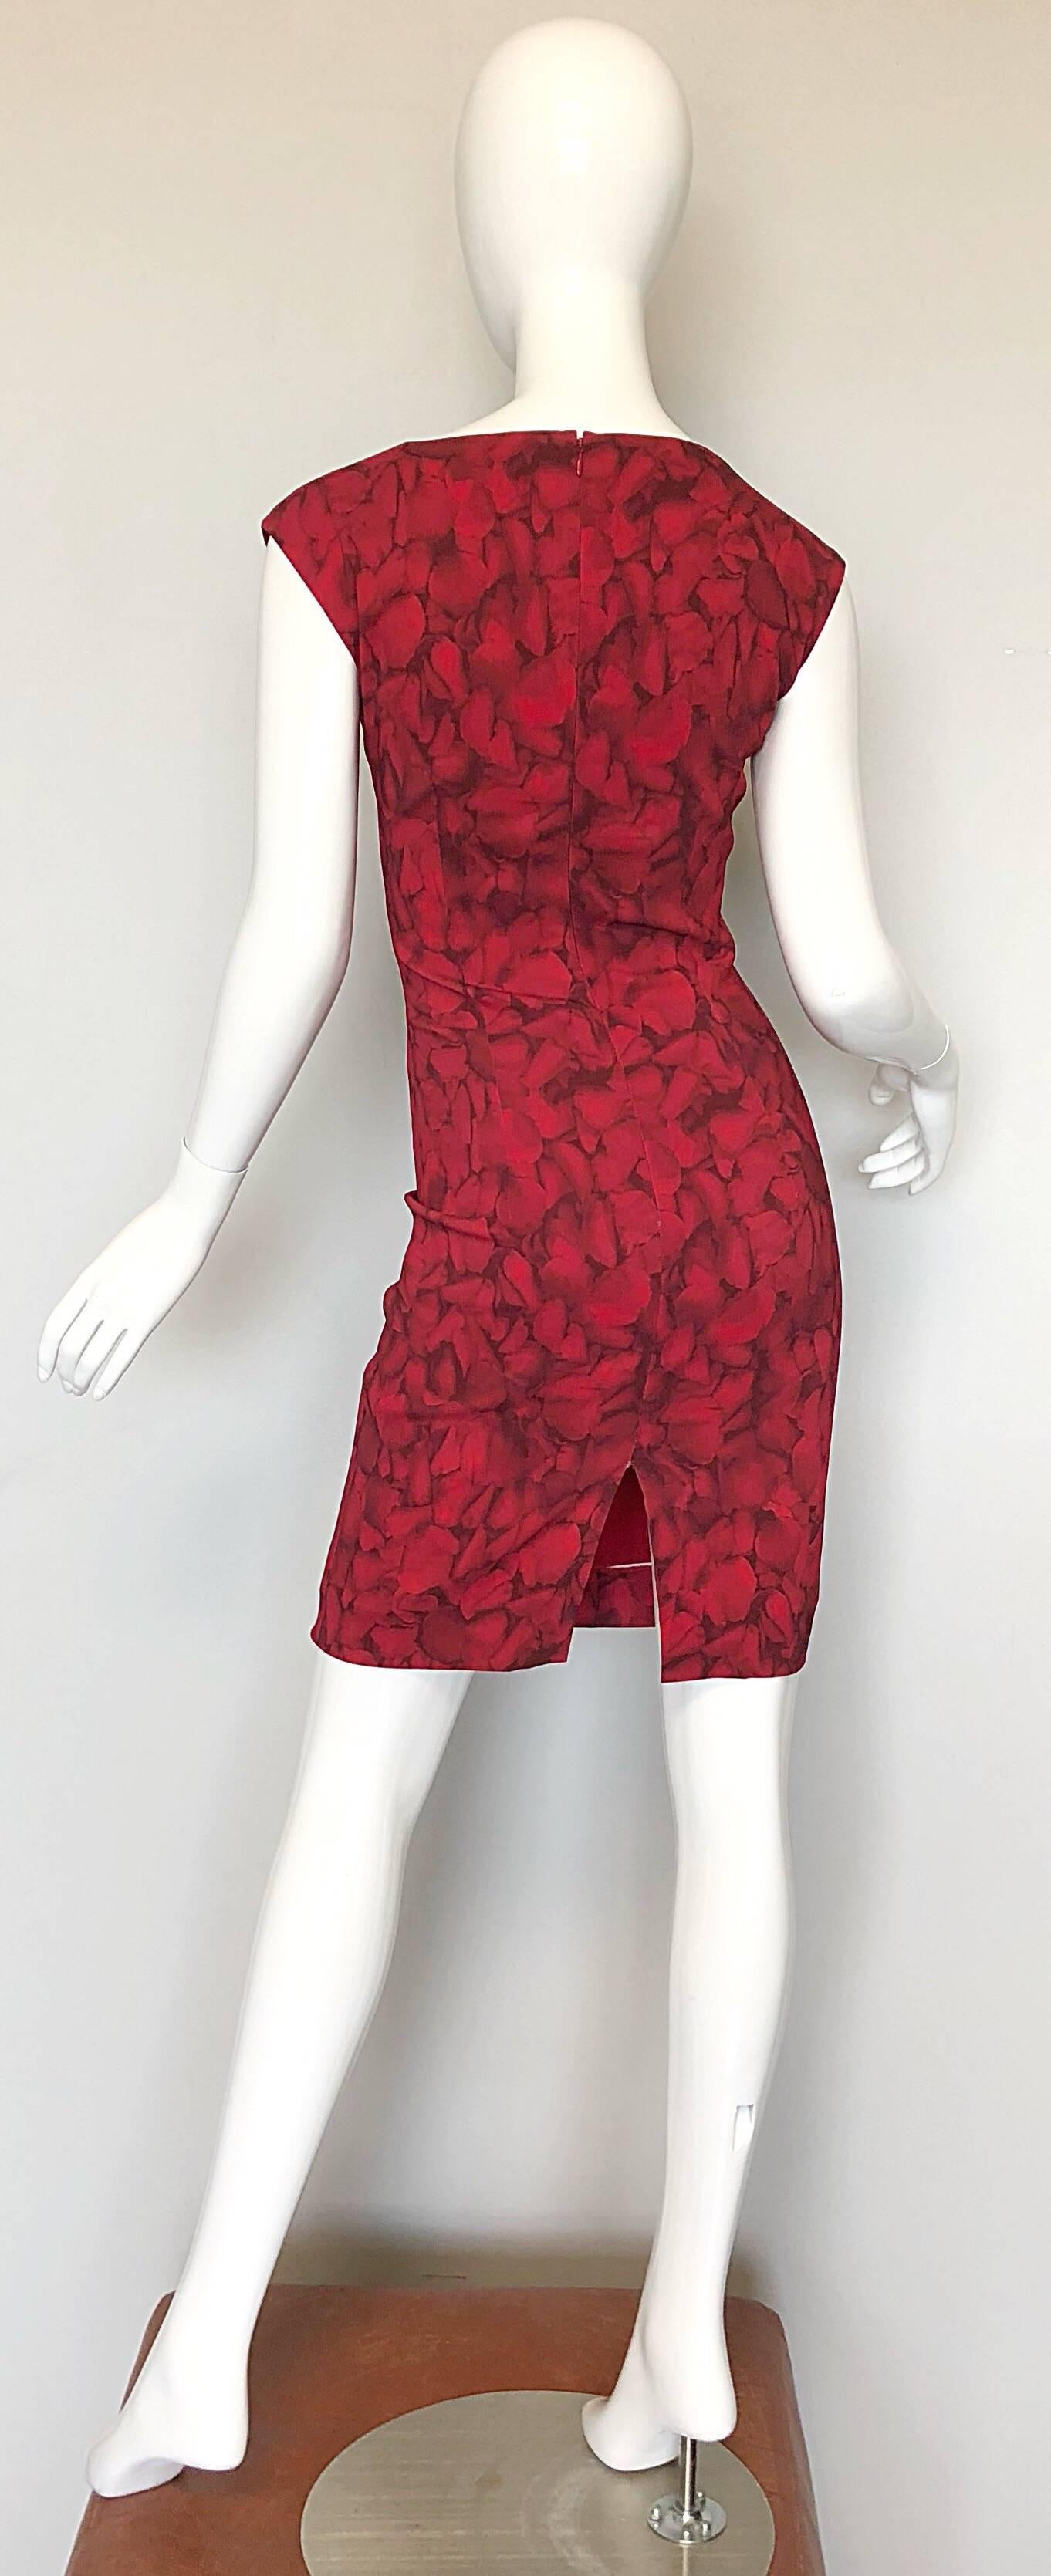 Michael Kors Collection 2010 Runway Size 4 / 6 Rose Petal Red + Black Mini Dress In Excellent Condition For Sale In San Diego, CA